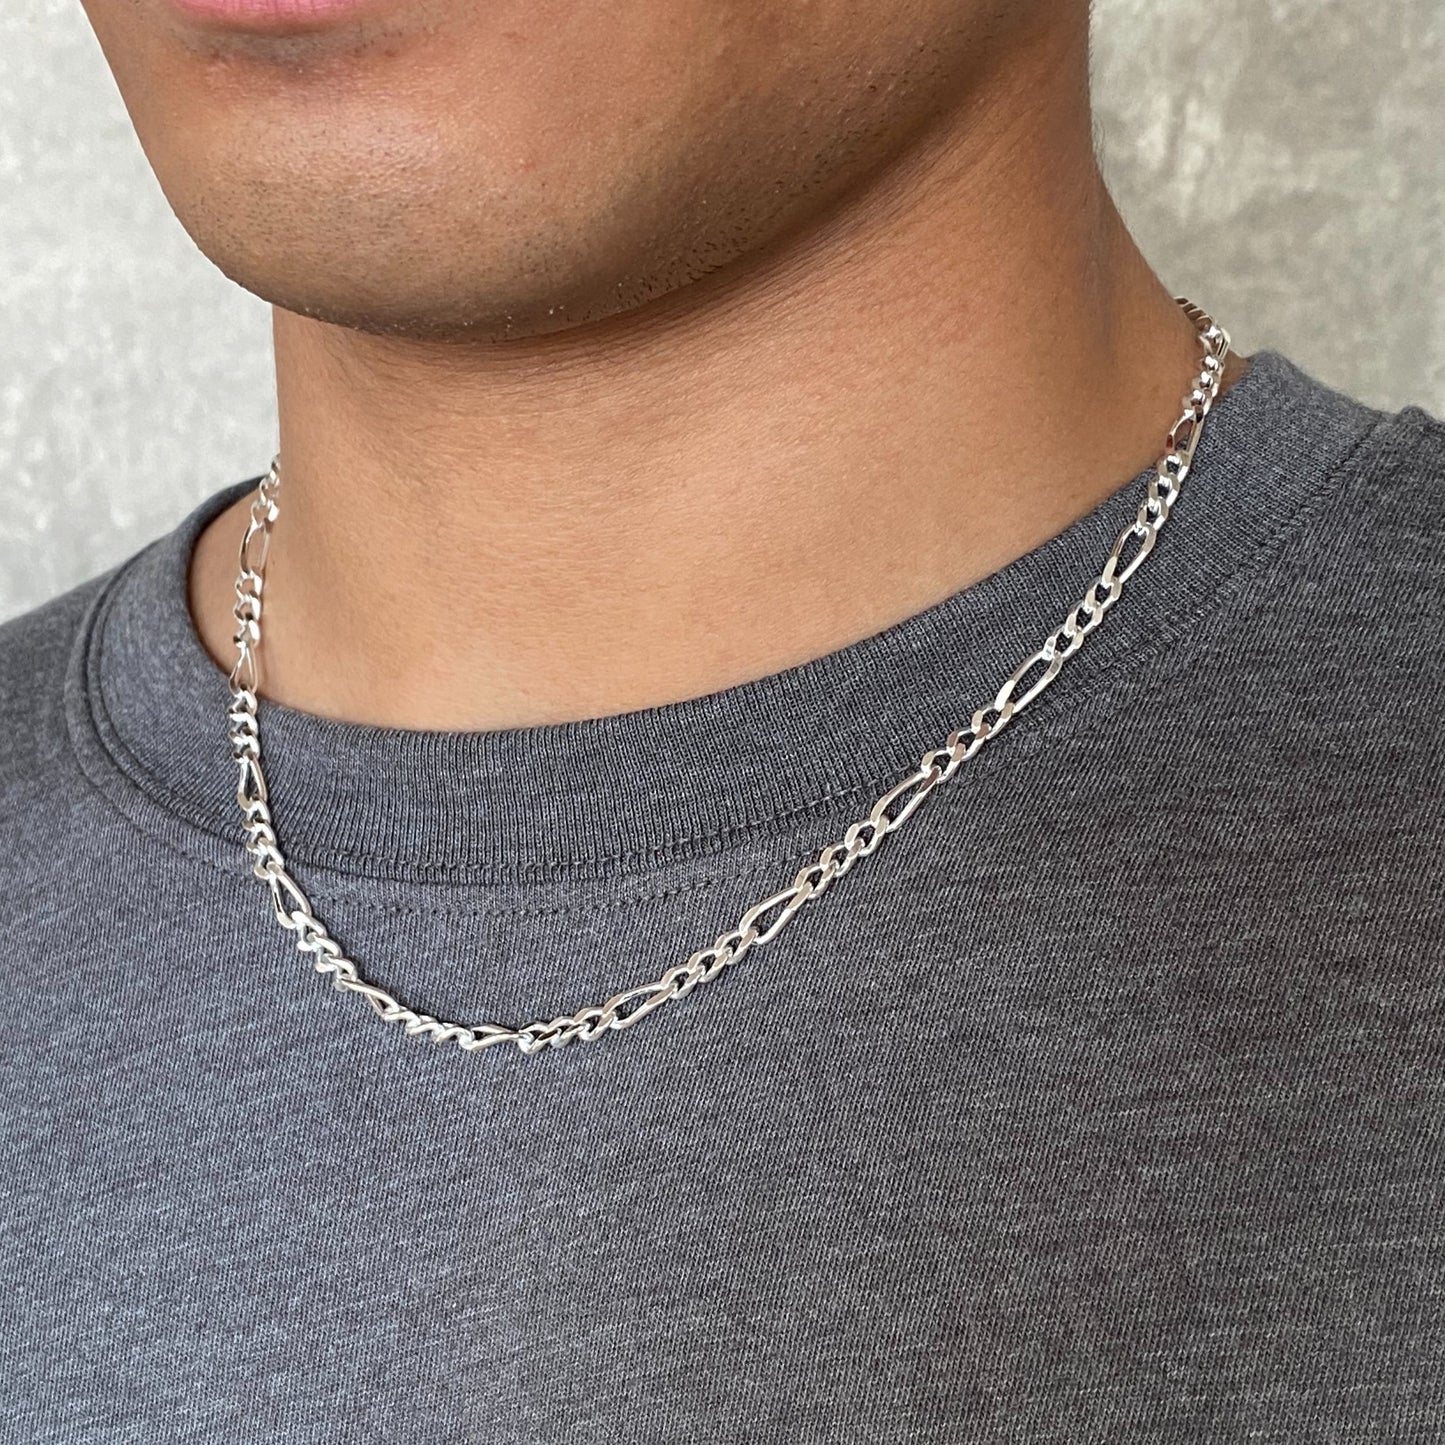 Figaro Chain with Diamond Cut Necklace